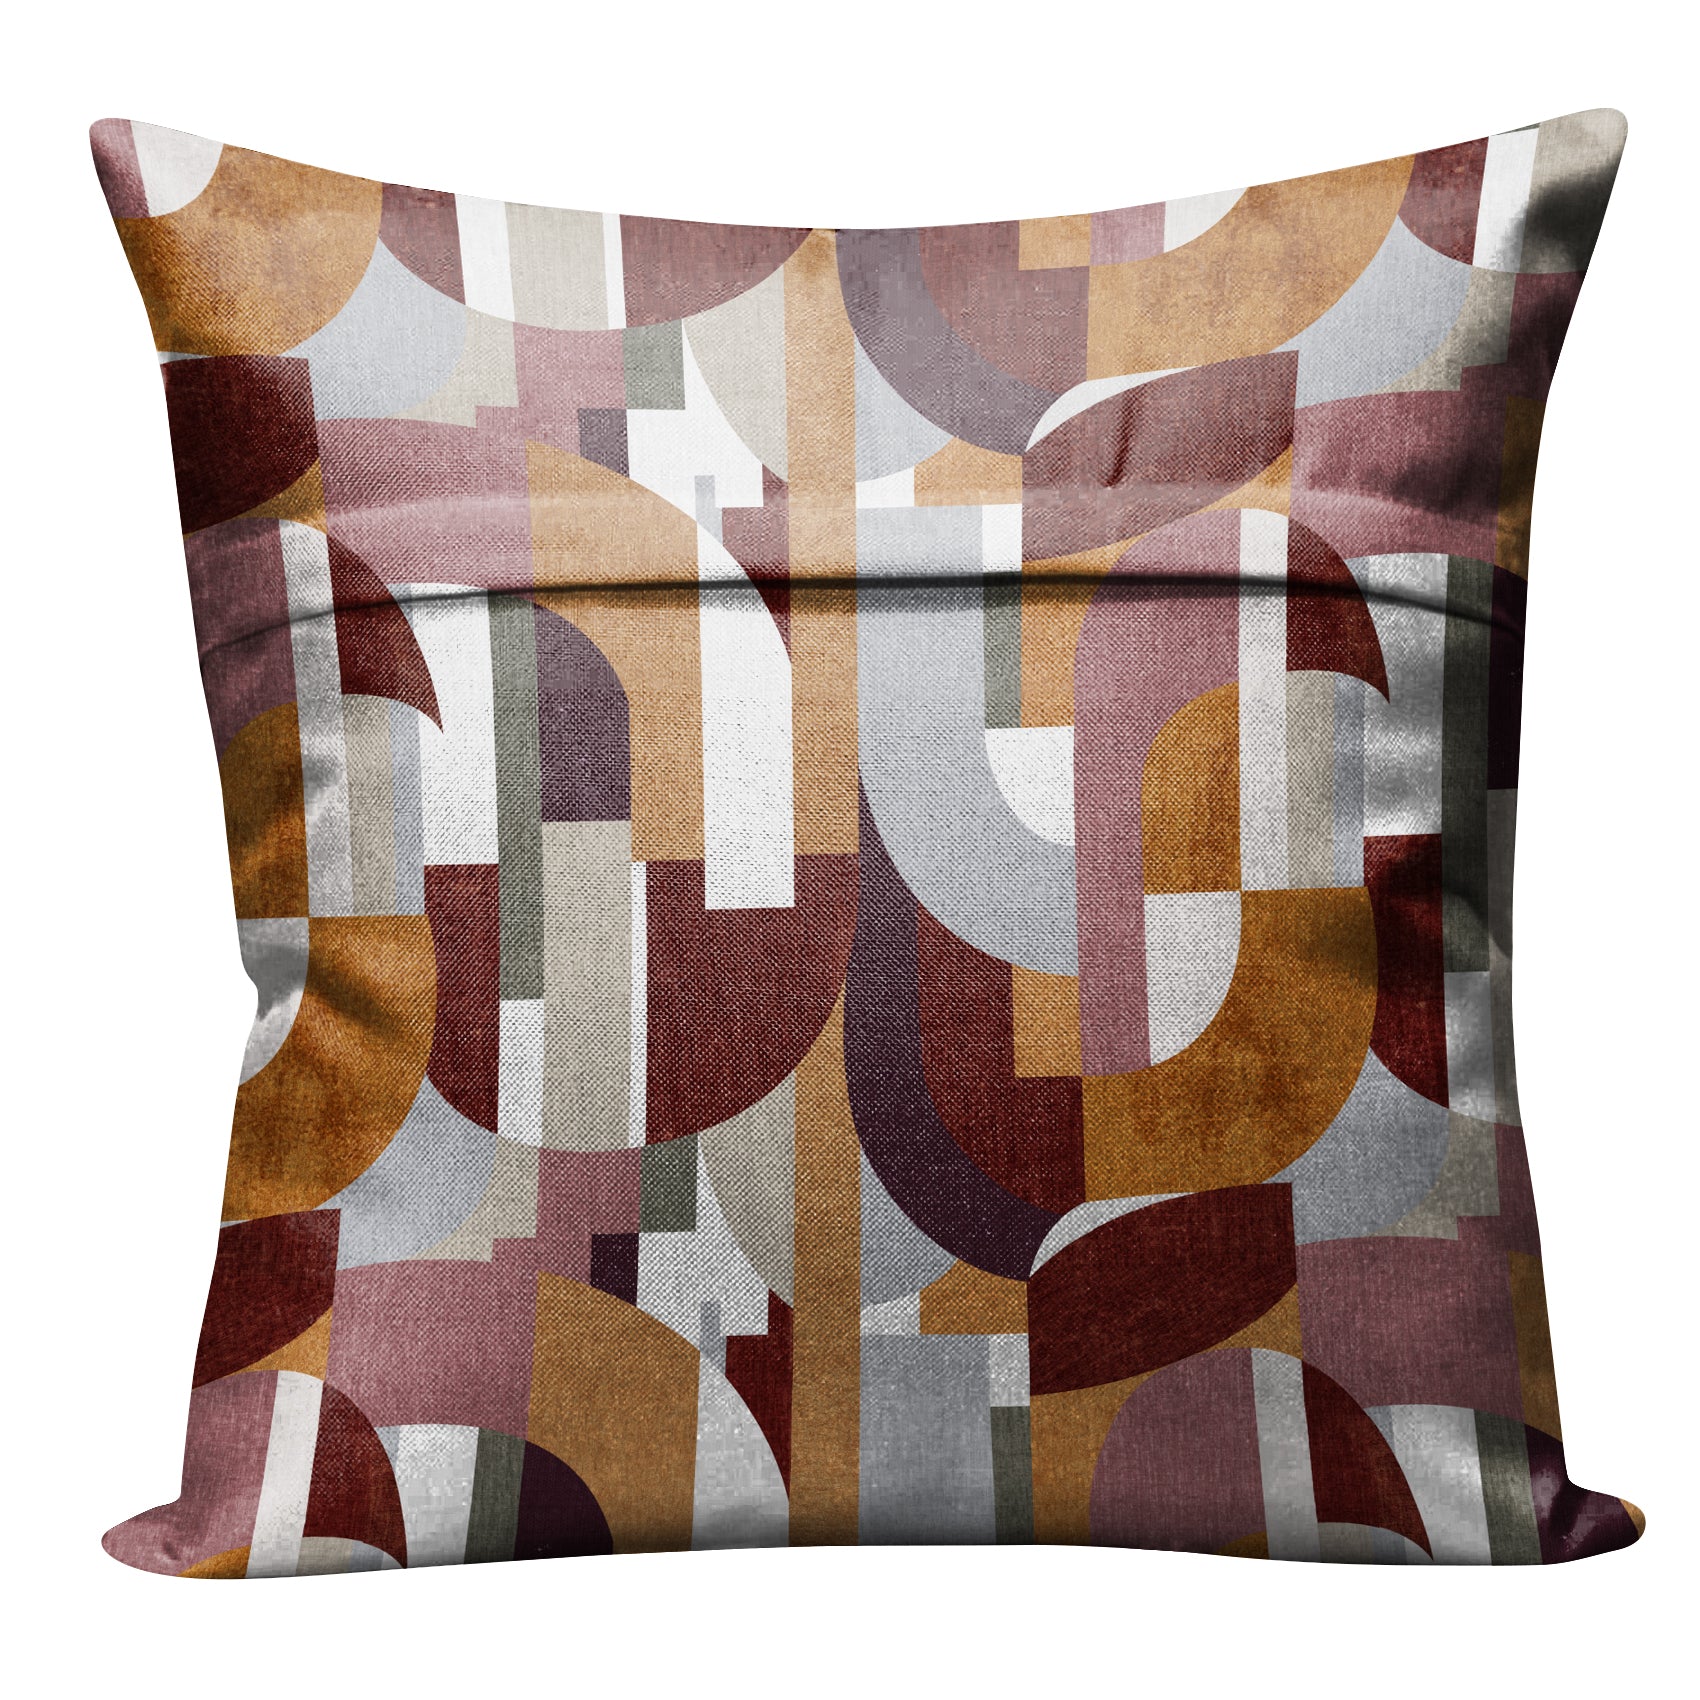 ILLUSION CURVES (16X16 INCH) DIGITAL PRINTED CUSHION COVER CAMEL/PINK